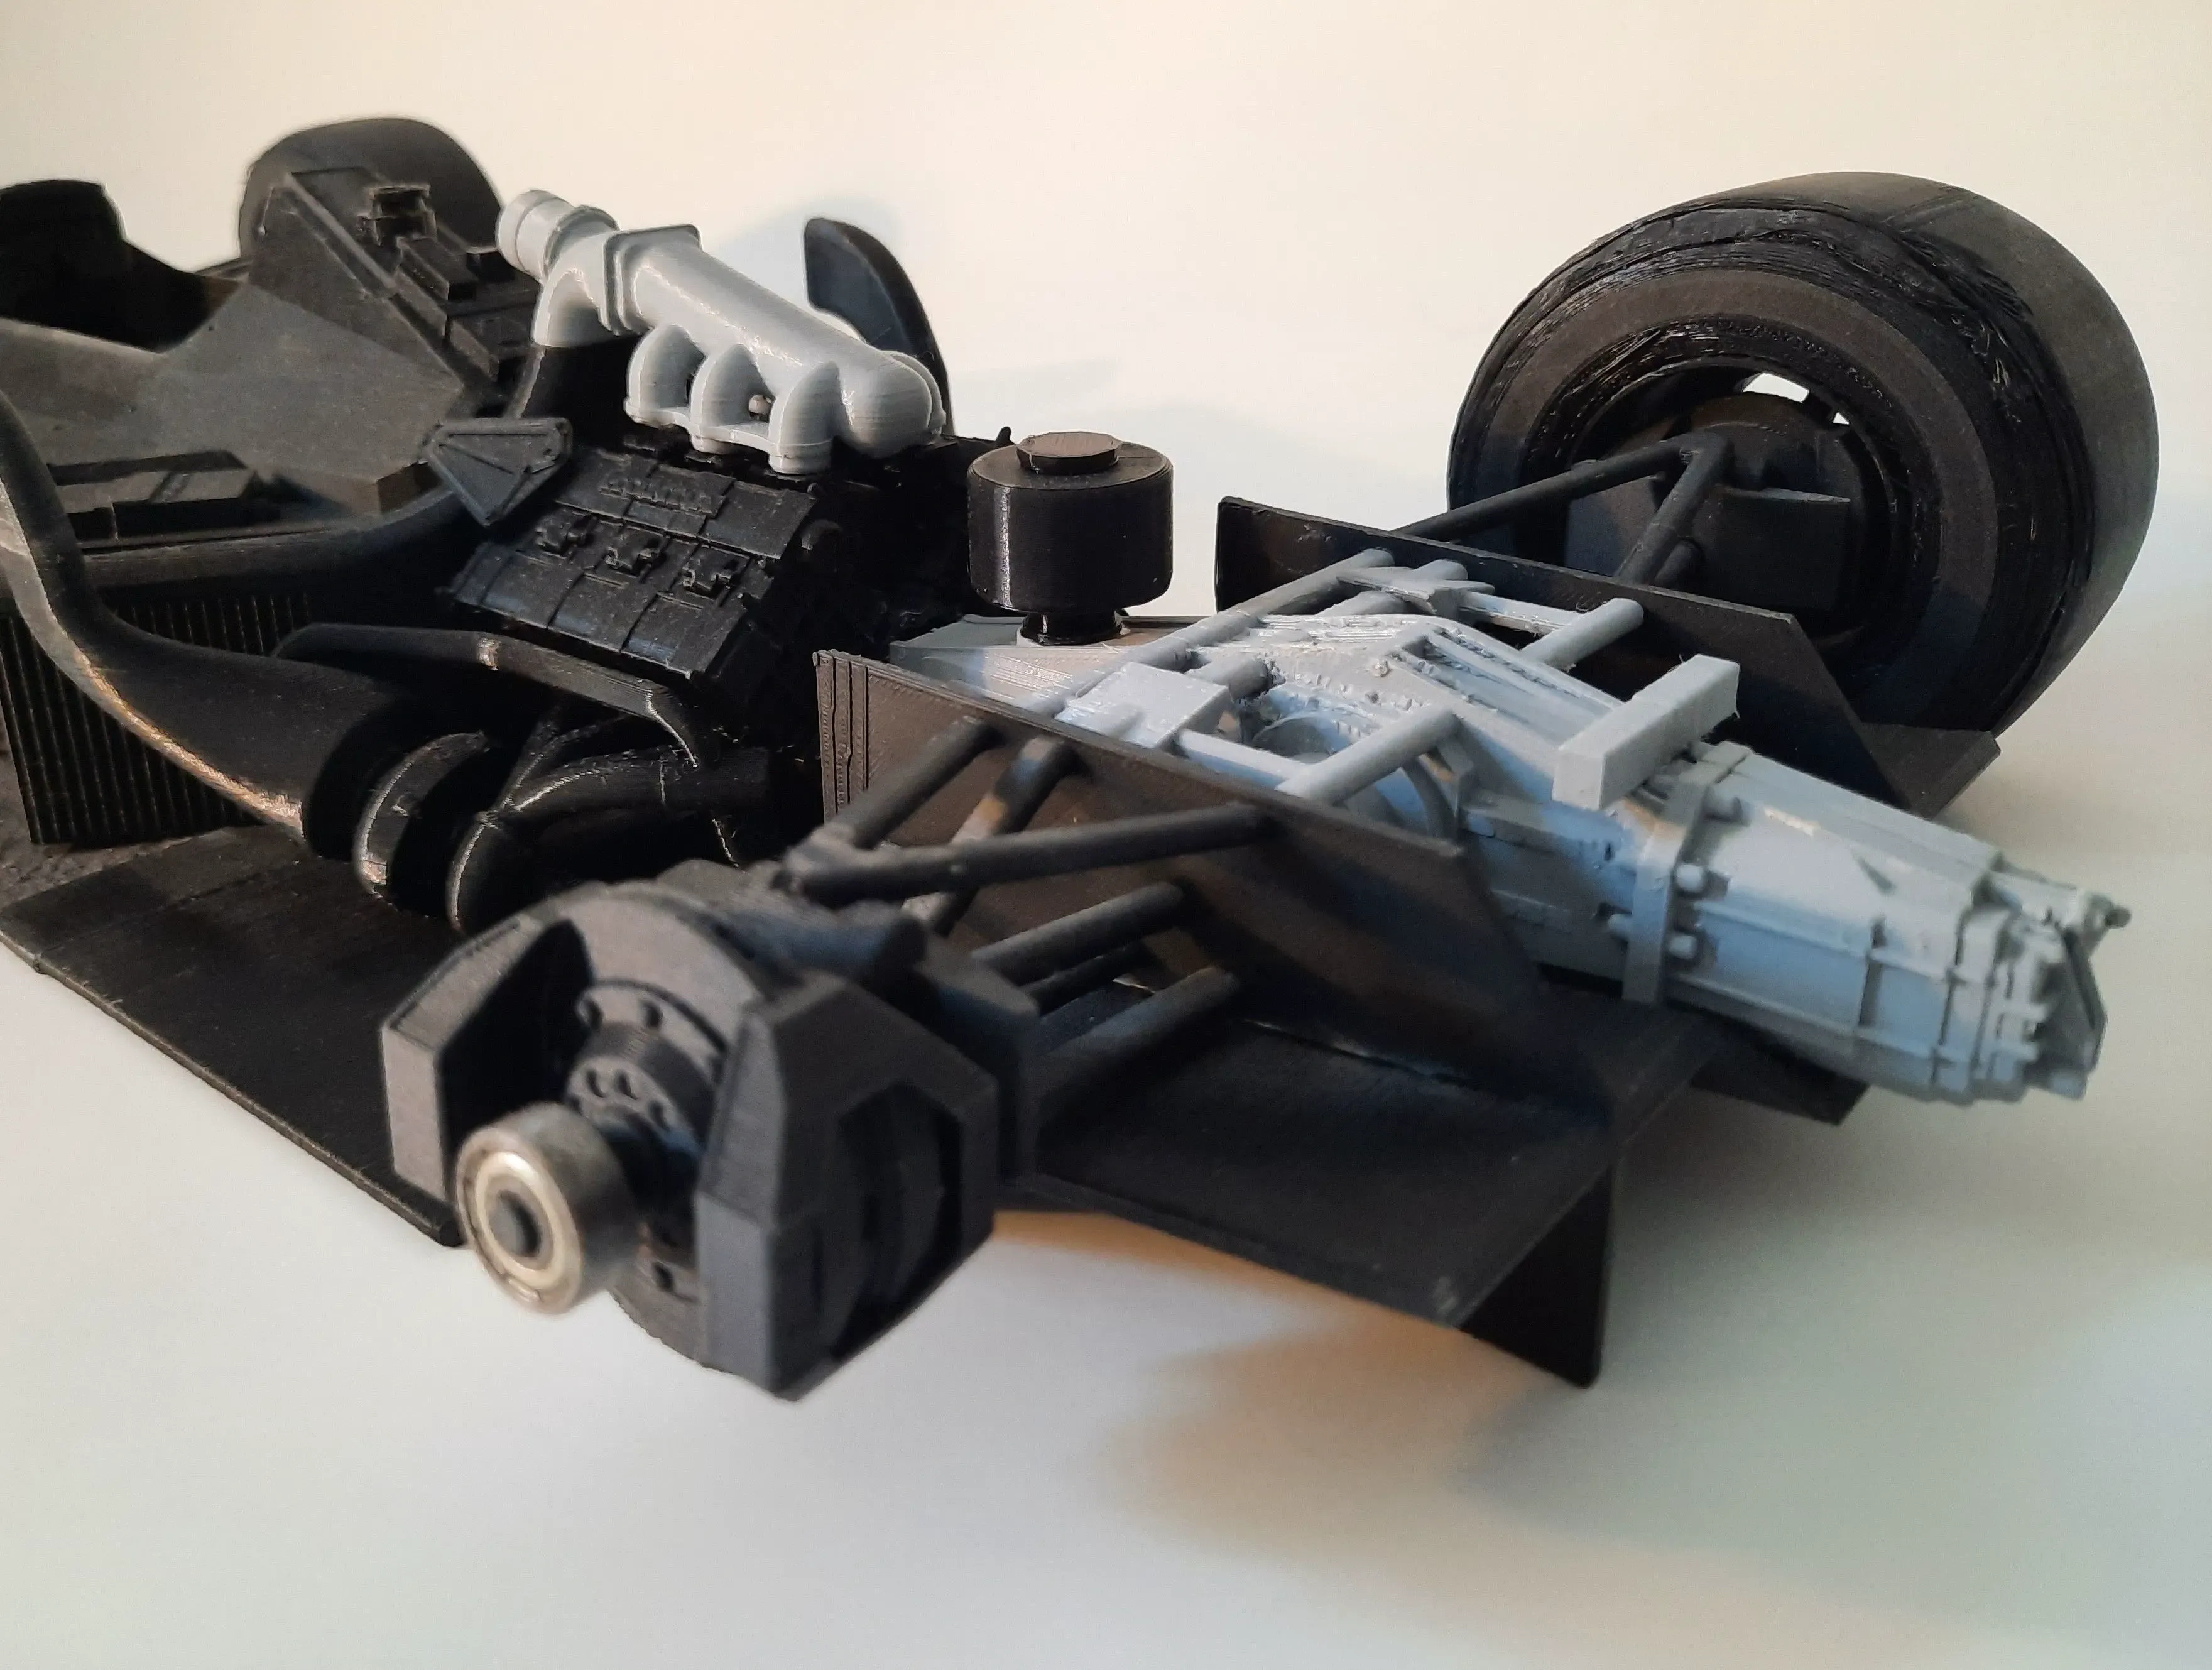 1:8 SCALE 1988 FORMULA RACER - FULLY PRINTABLE WITH INTERNAL